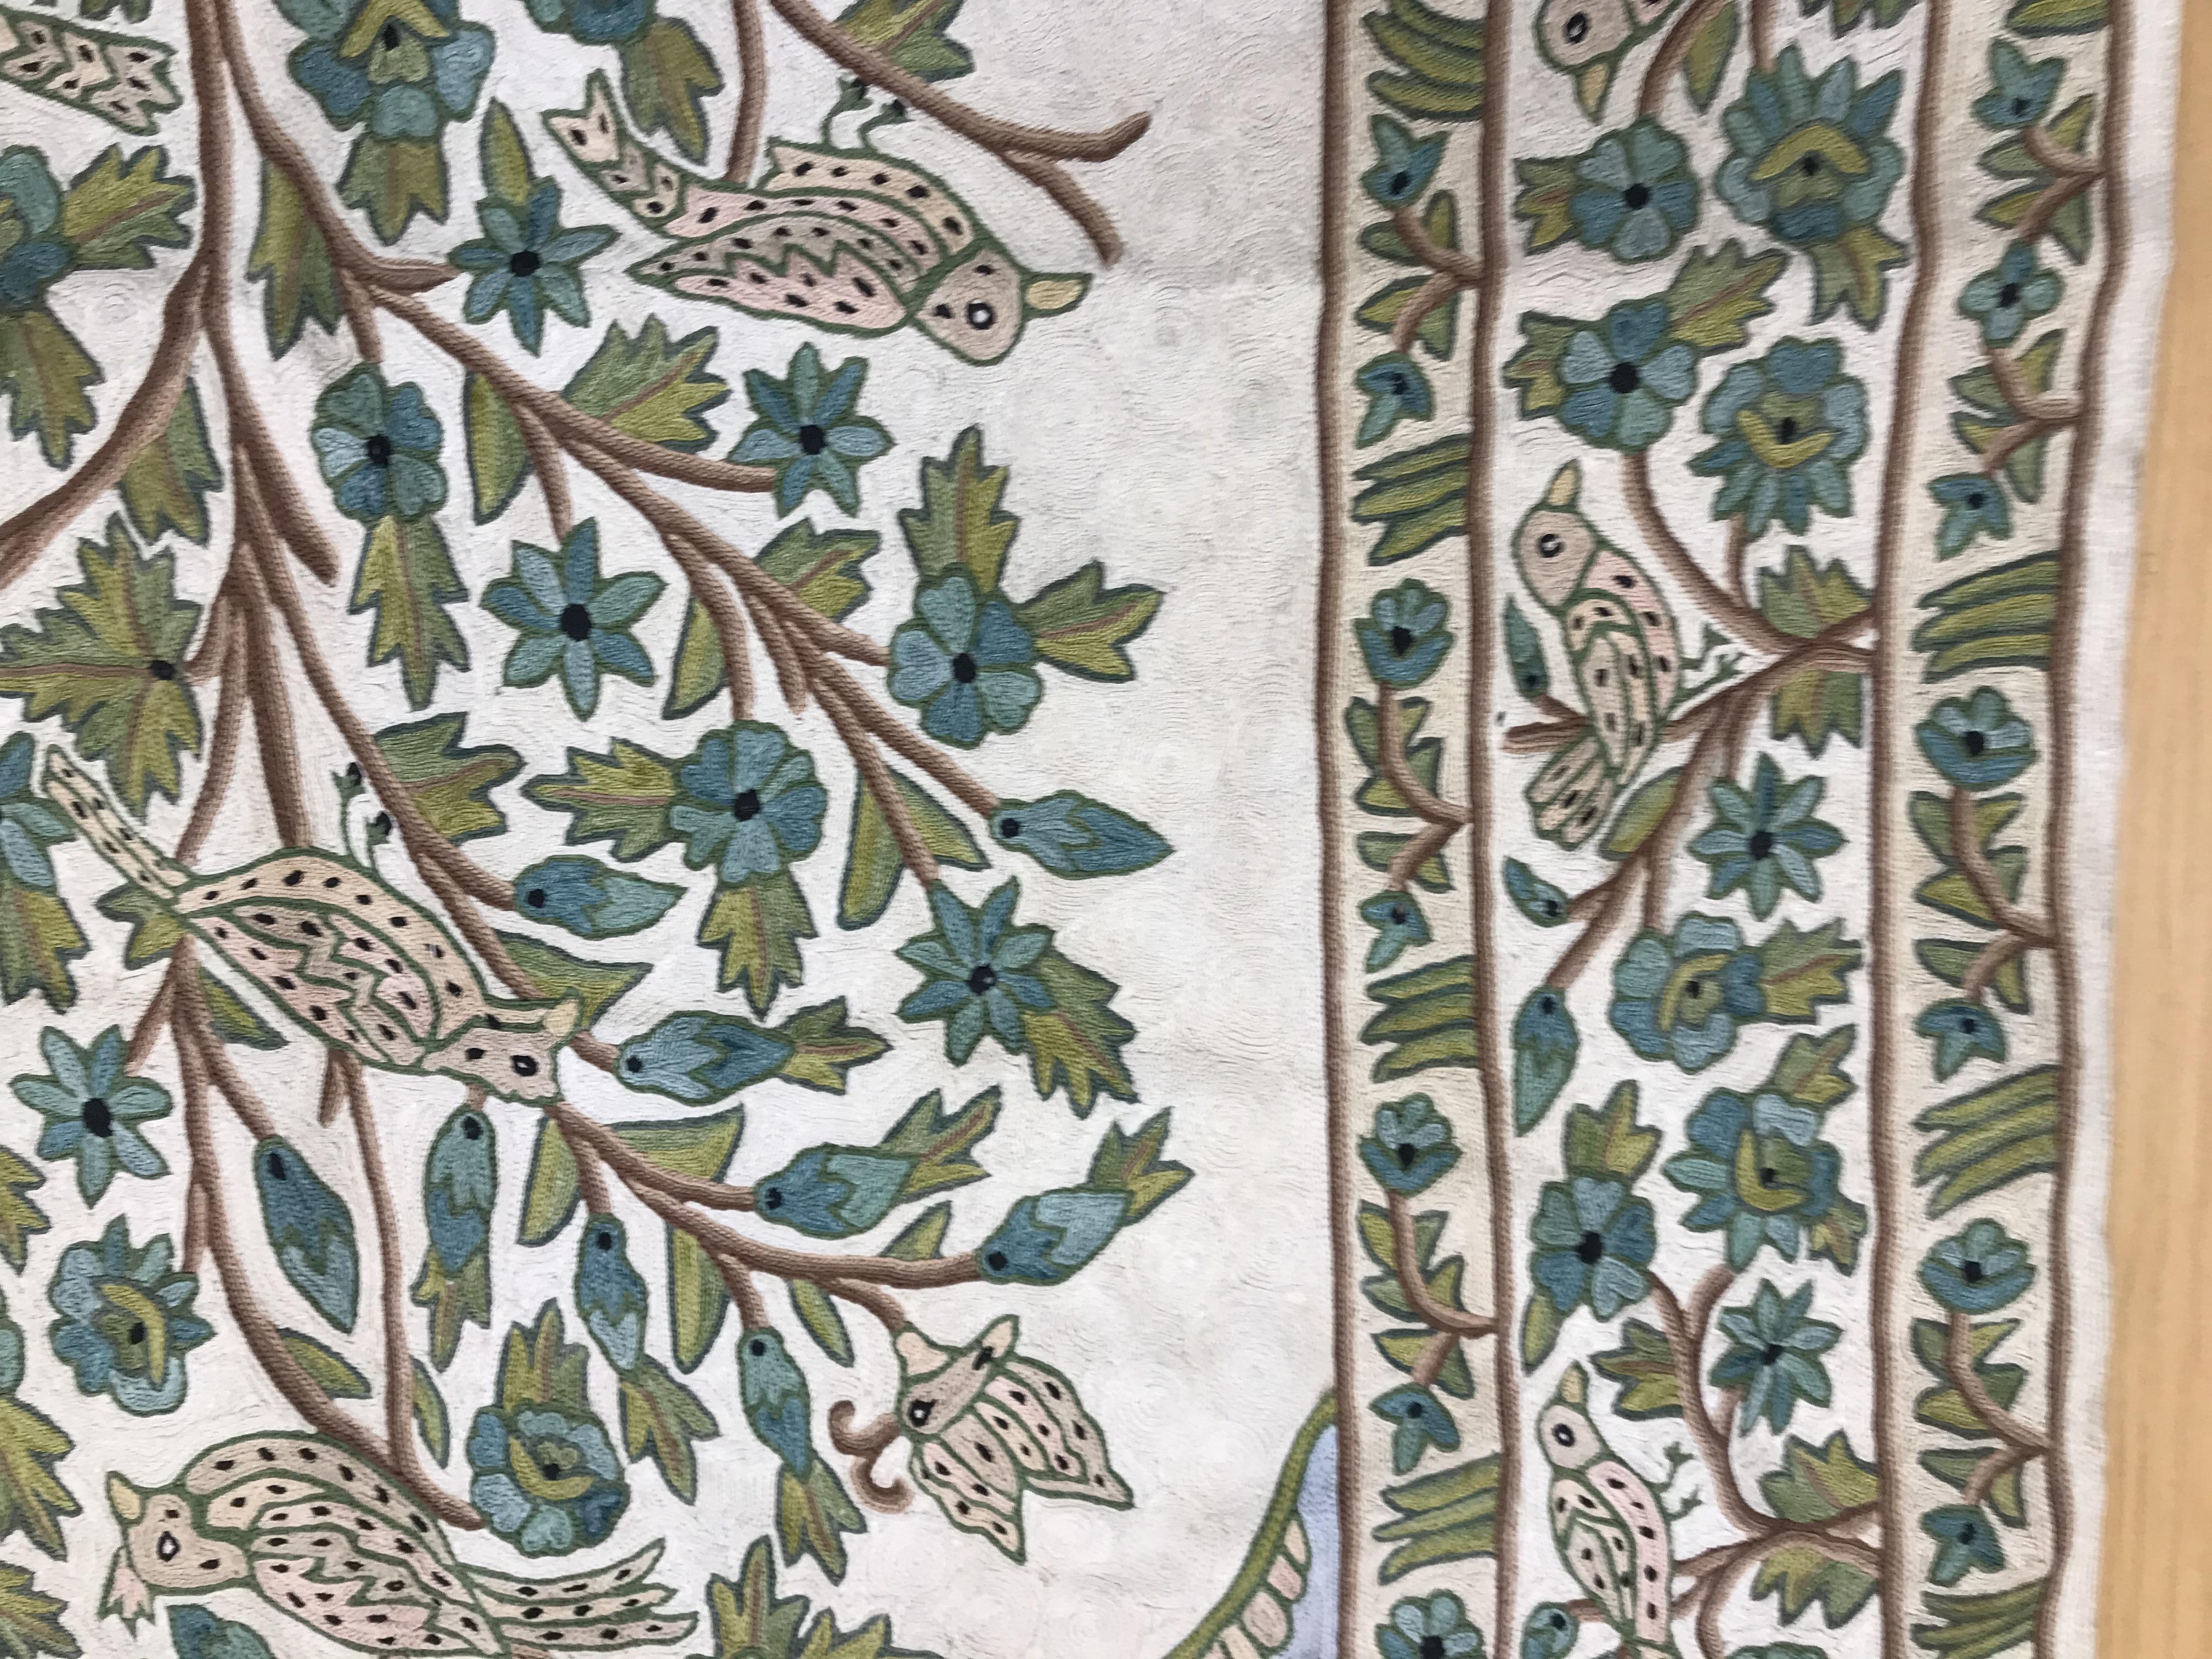 A crewel work panel depicting tree and birds in blue and teal on a cream and blue ground, - Image 8 of 16